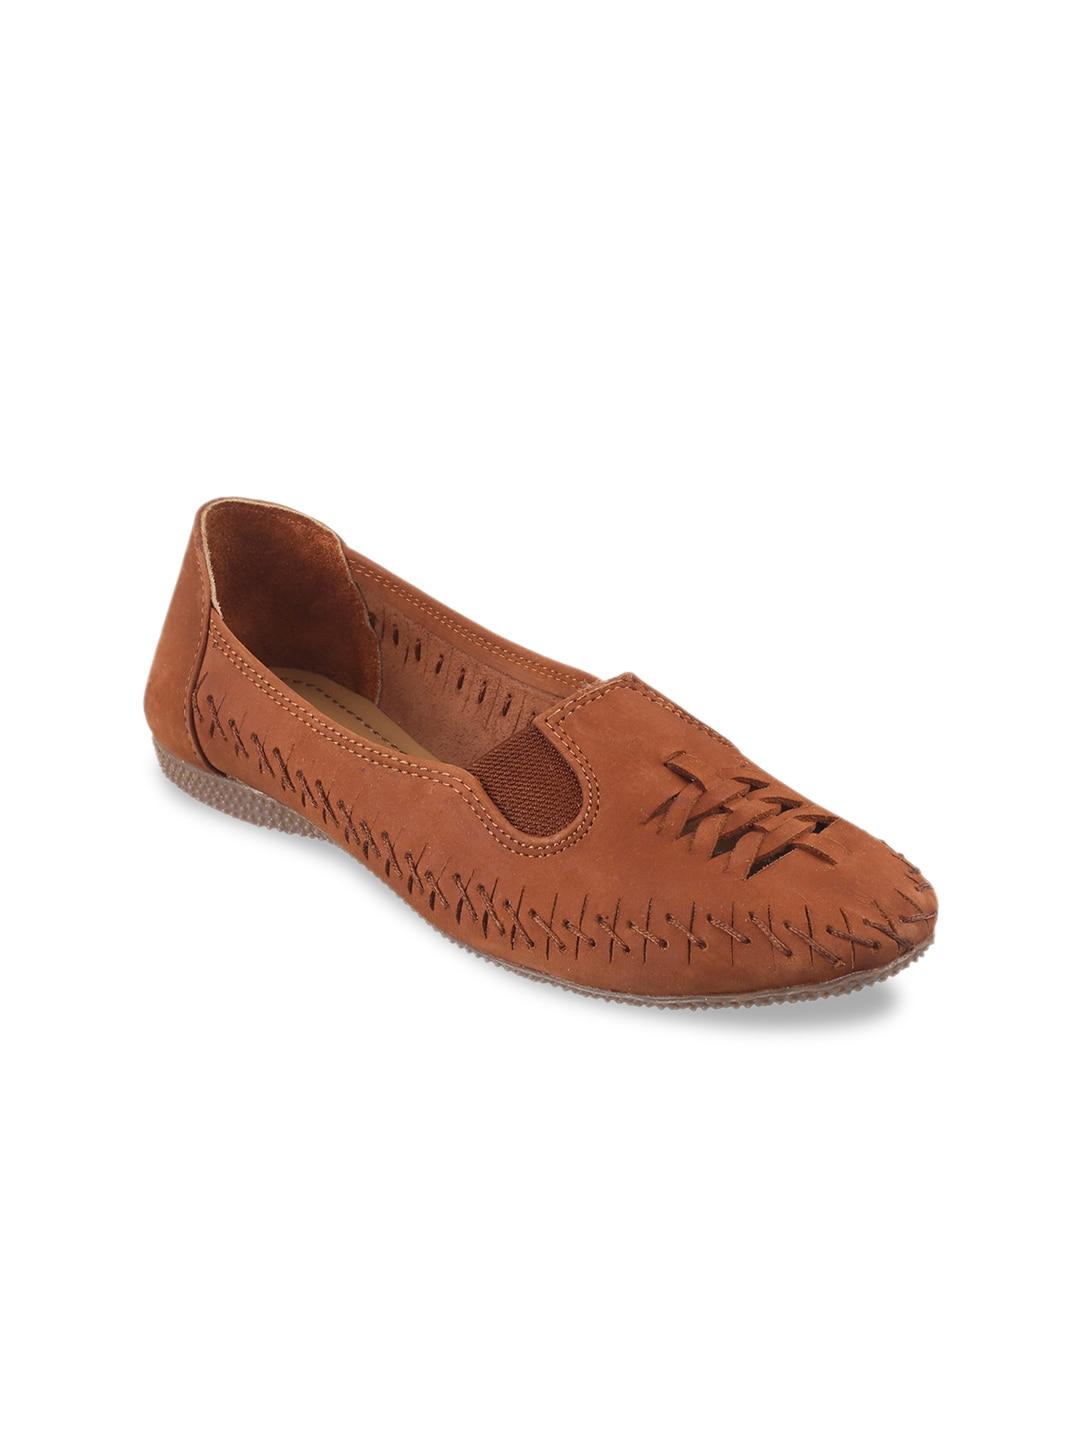 catwalk women tan perforations leather loafers